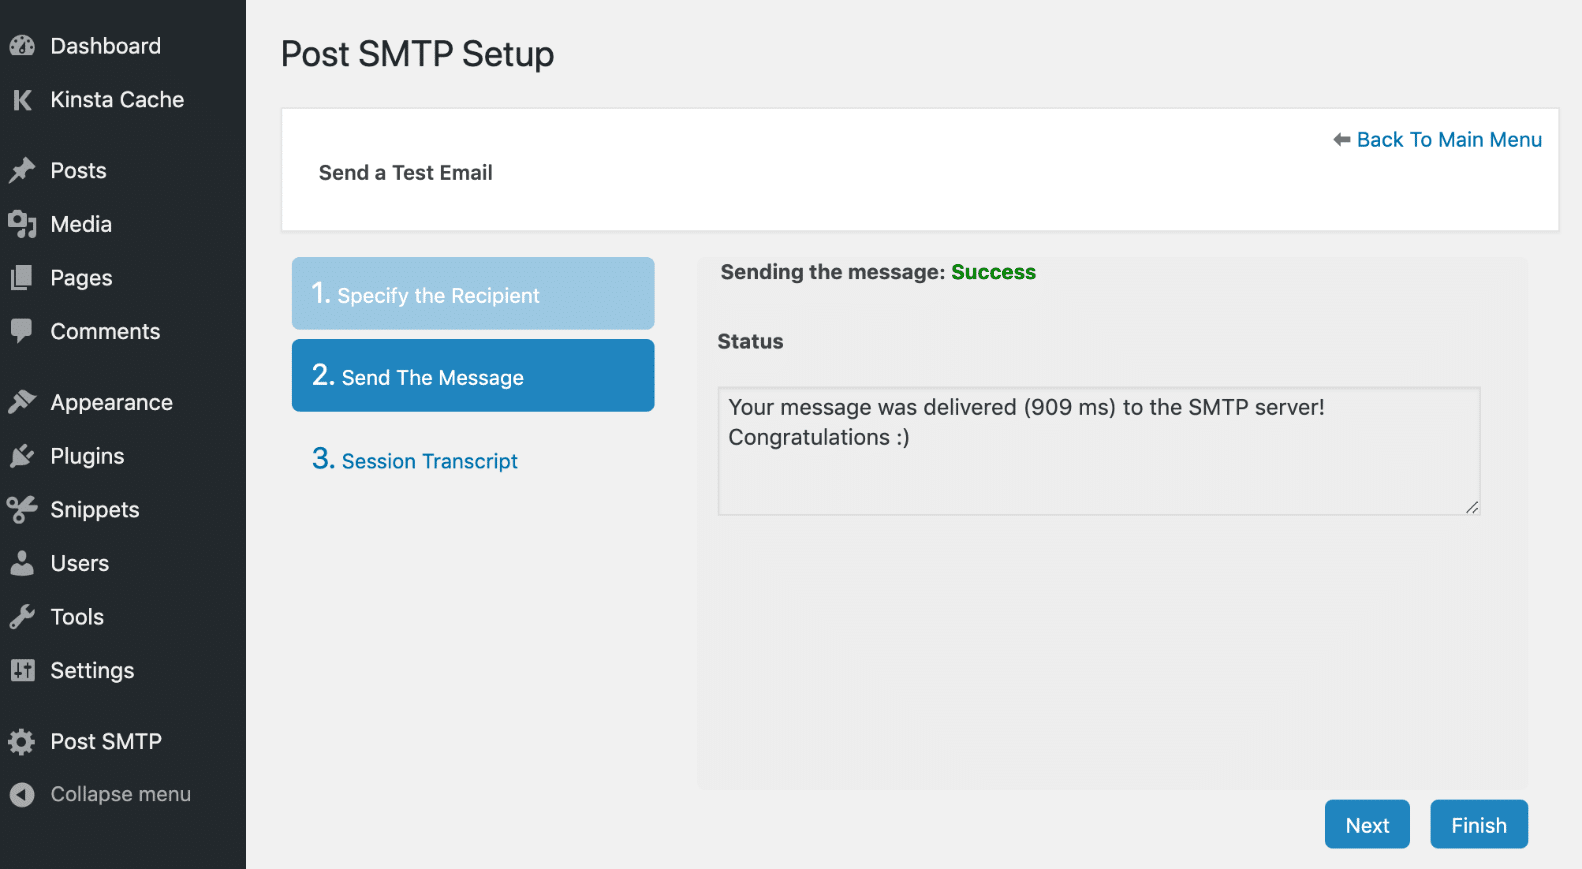 Post SMTP-test-email succes